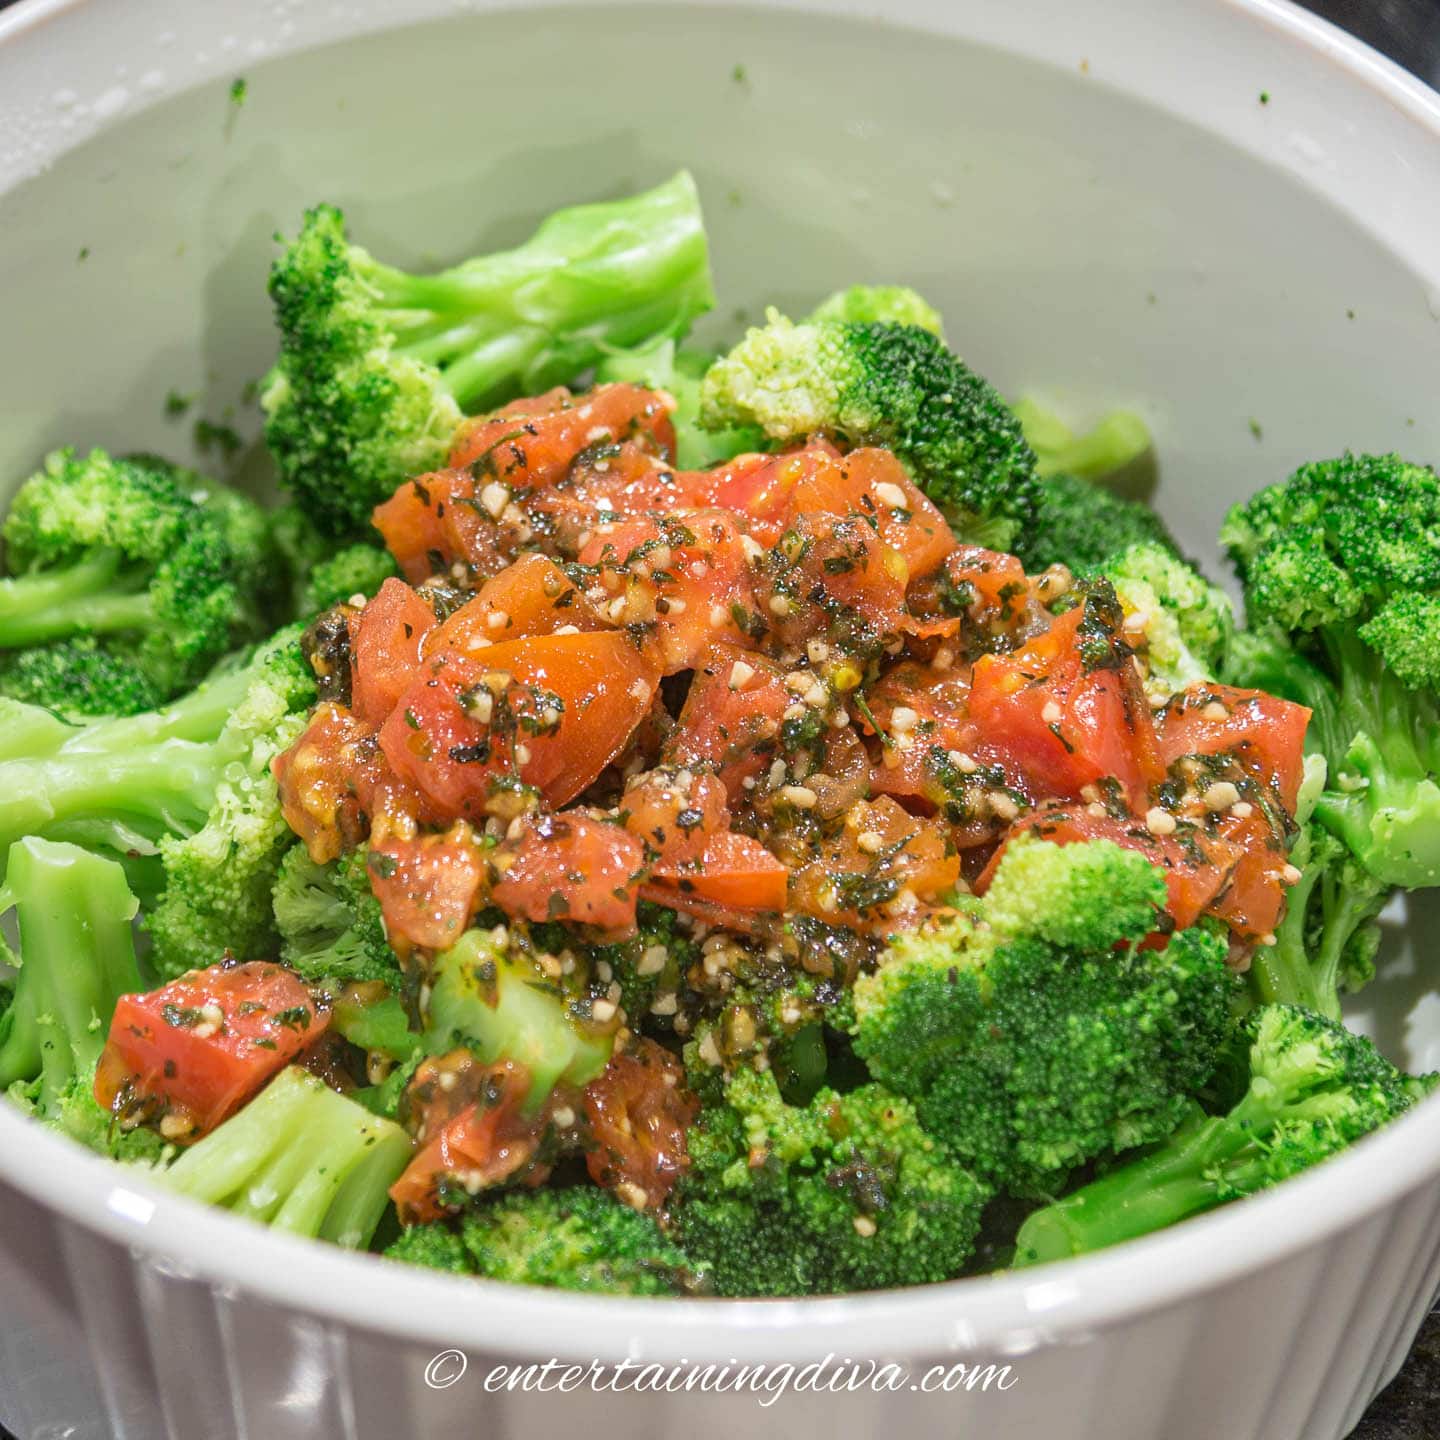 Tomato mixture on top of microwaved broccoli in a glass baking dish